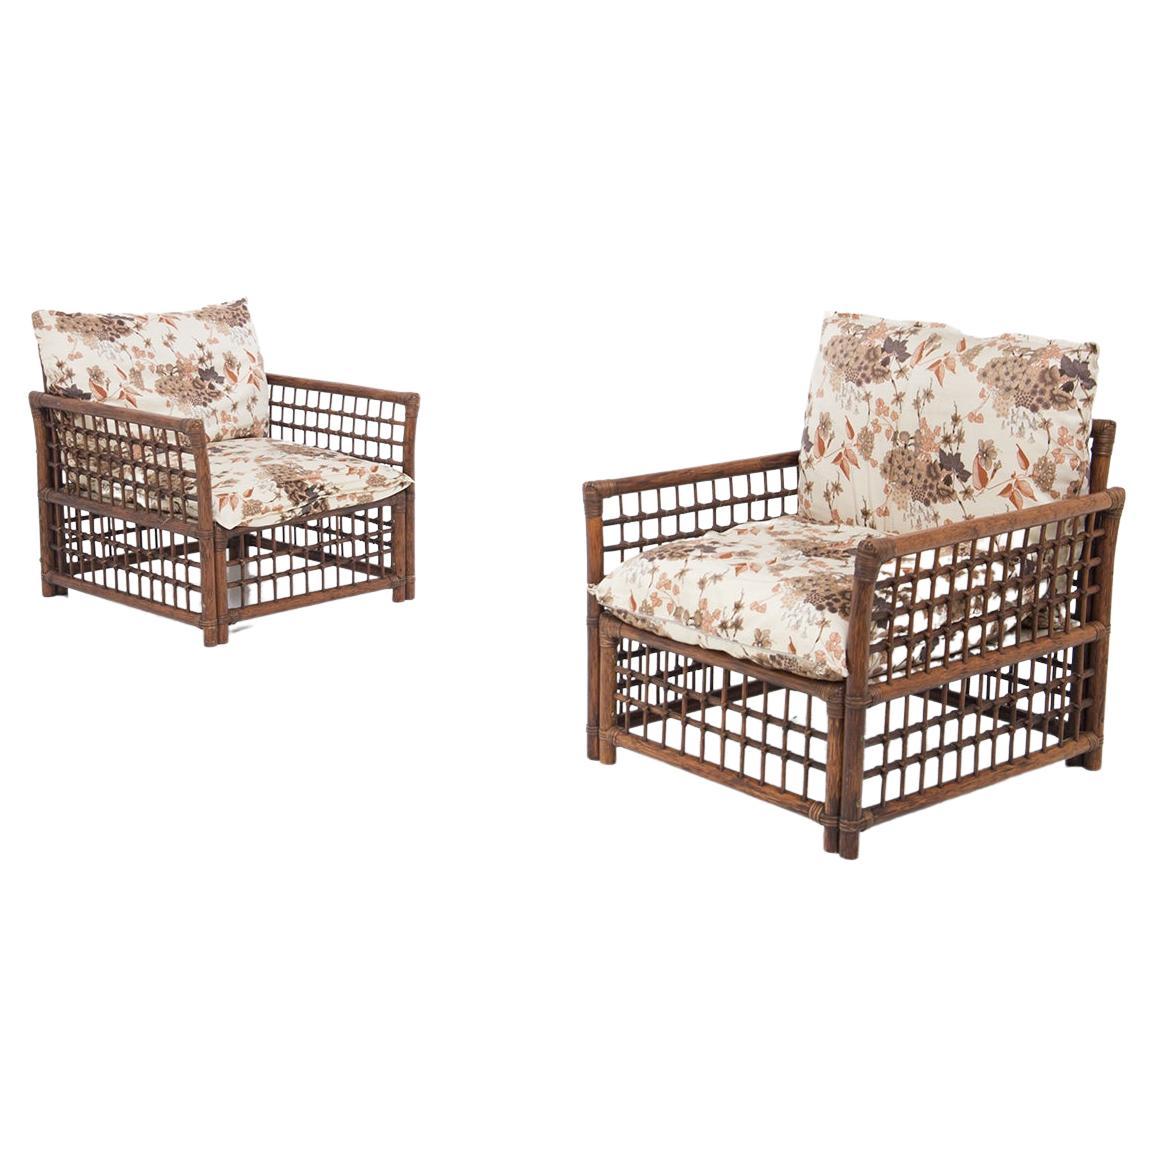 Vivai del Sud Vintage Wood and Rattan Armchairs W Floral Fabric